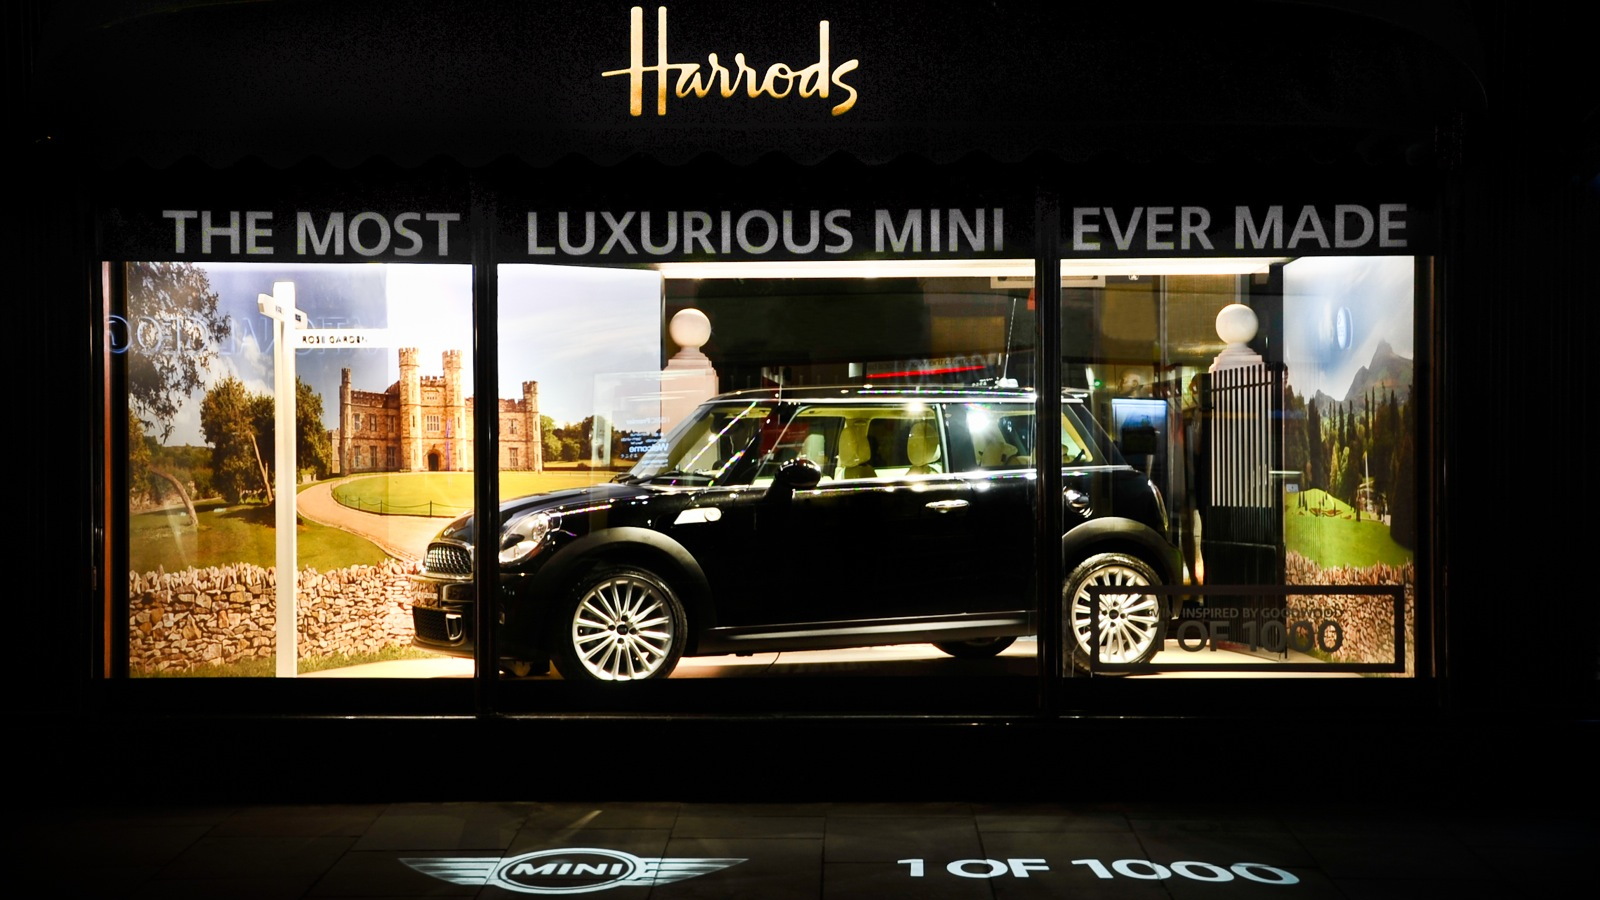 The MINI Inspired By Goodwood, on display at Harrods